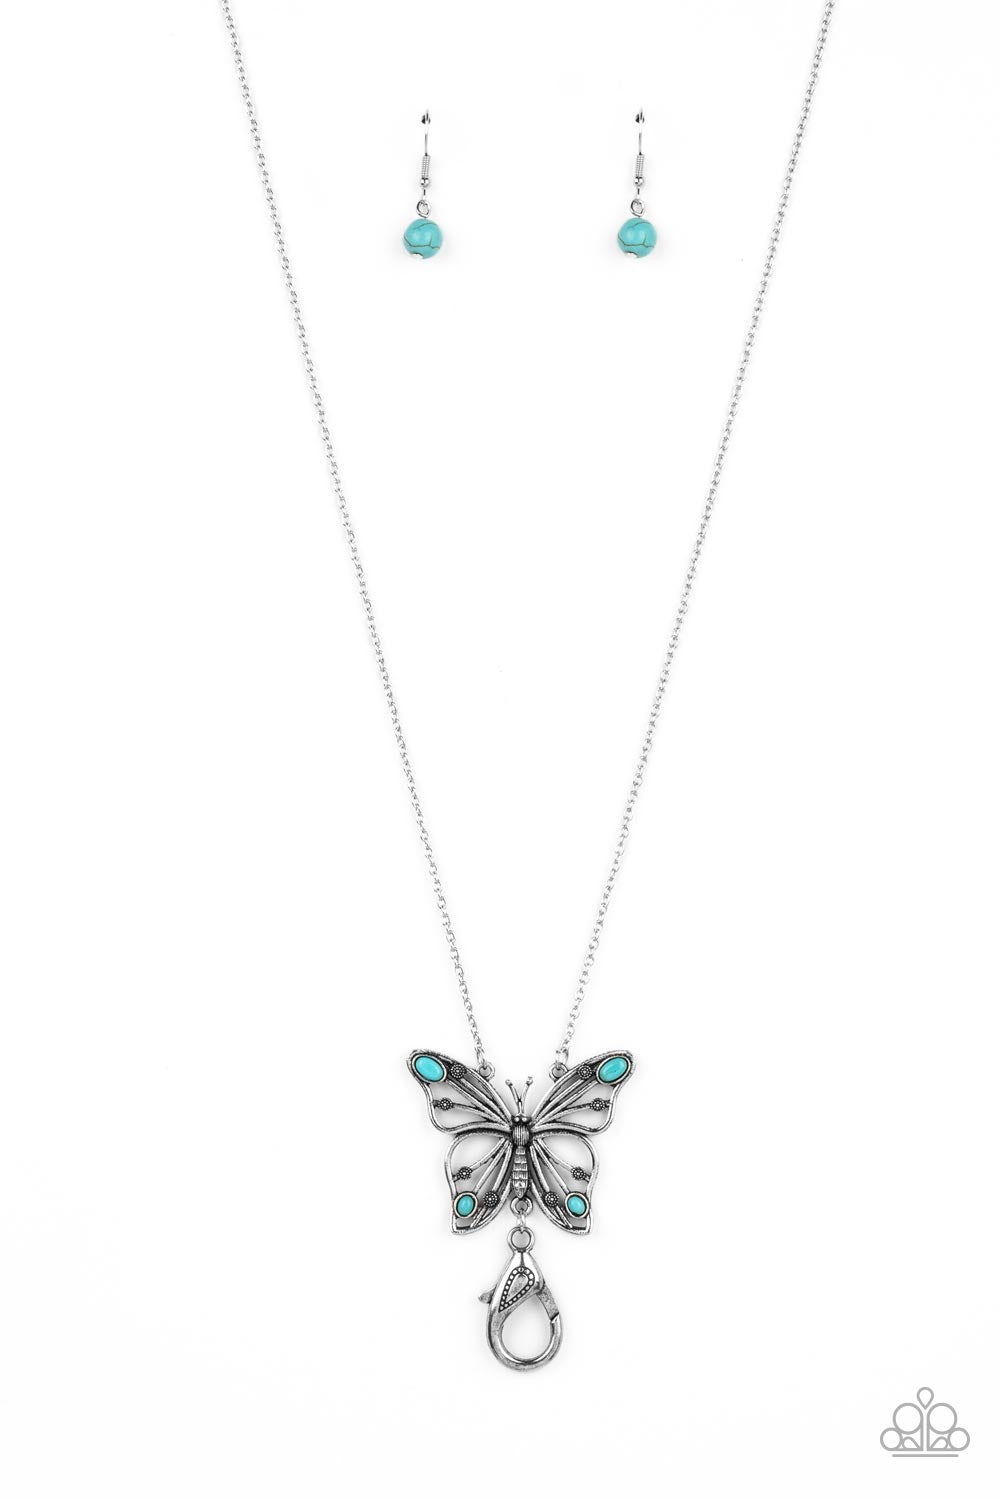 Paparazzi Badlands Butterfly - Blue Necklace - A Finishing Touch Jewelry